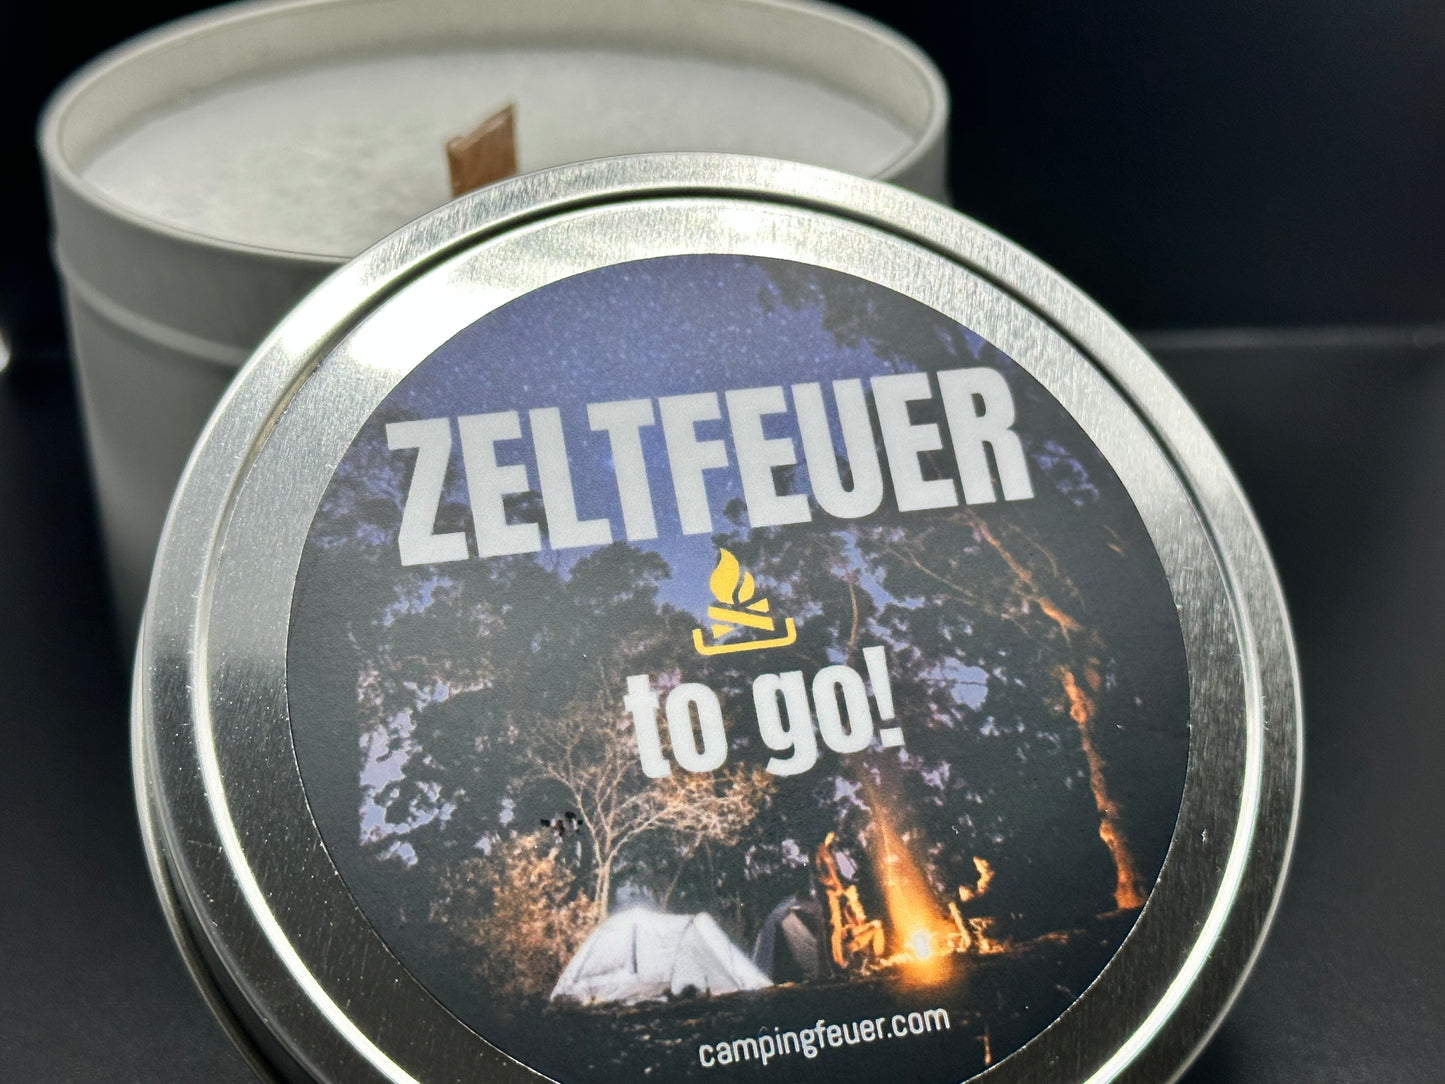 Zeltfeuer to go! als Lagerfeuer mit Holznote